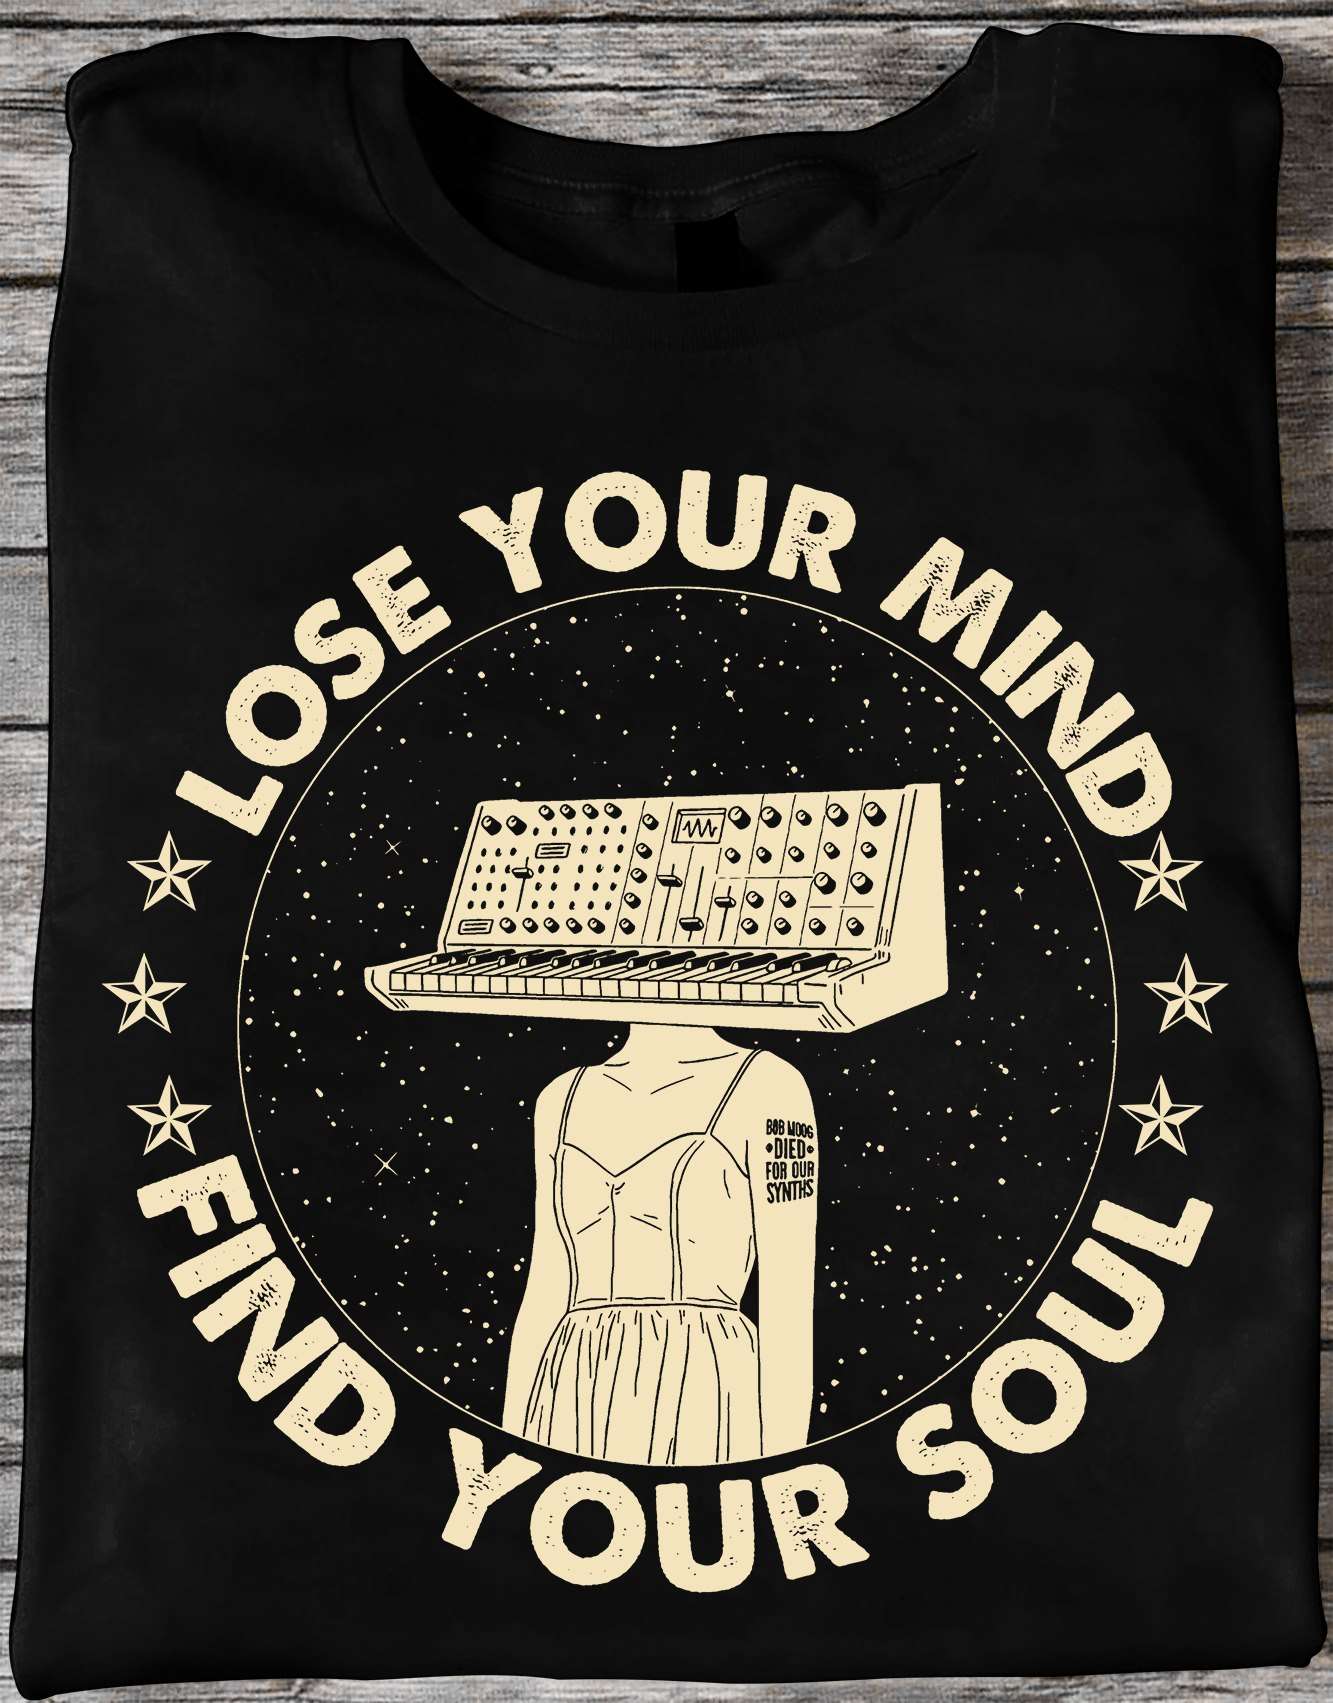 Lose your mind, find your soul - Music beat maker, Women loves music